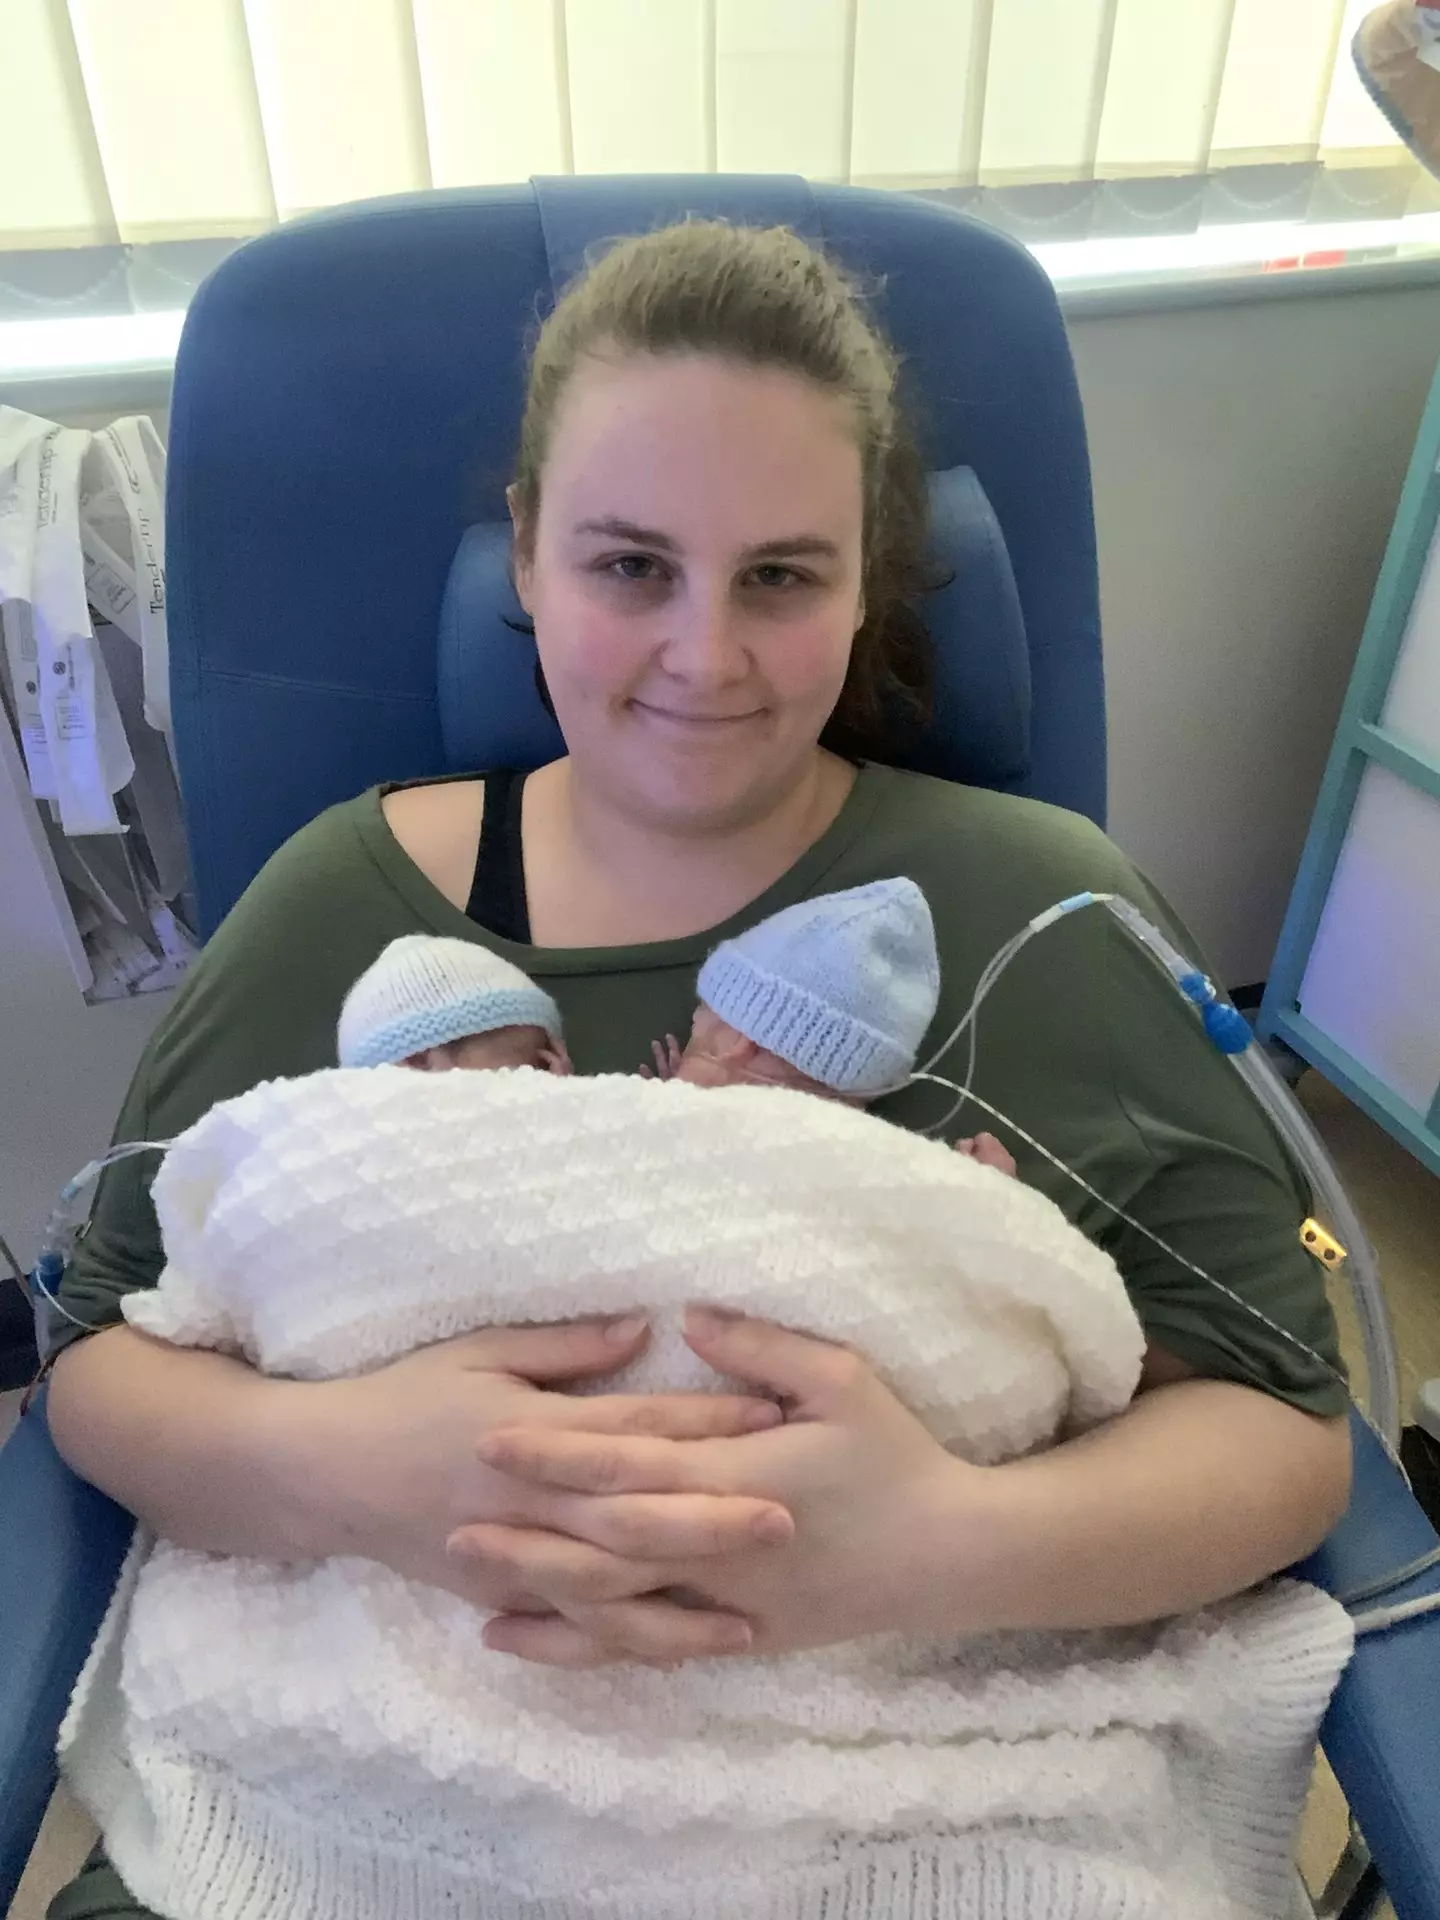 Mum Toni welcomed her twin boys at just 25 weeks.